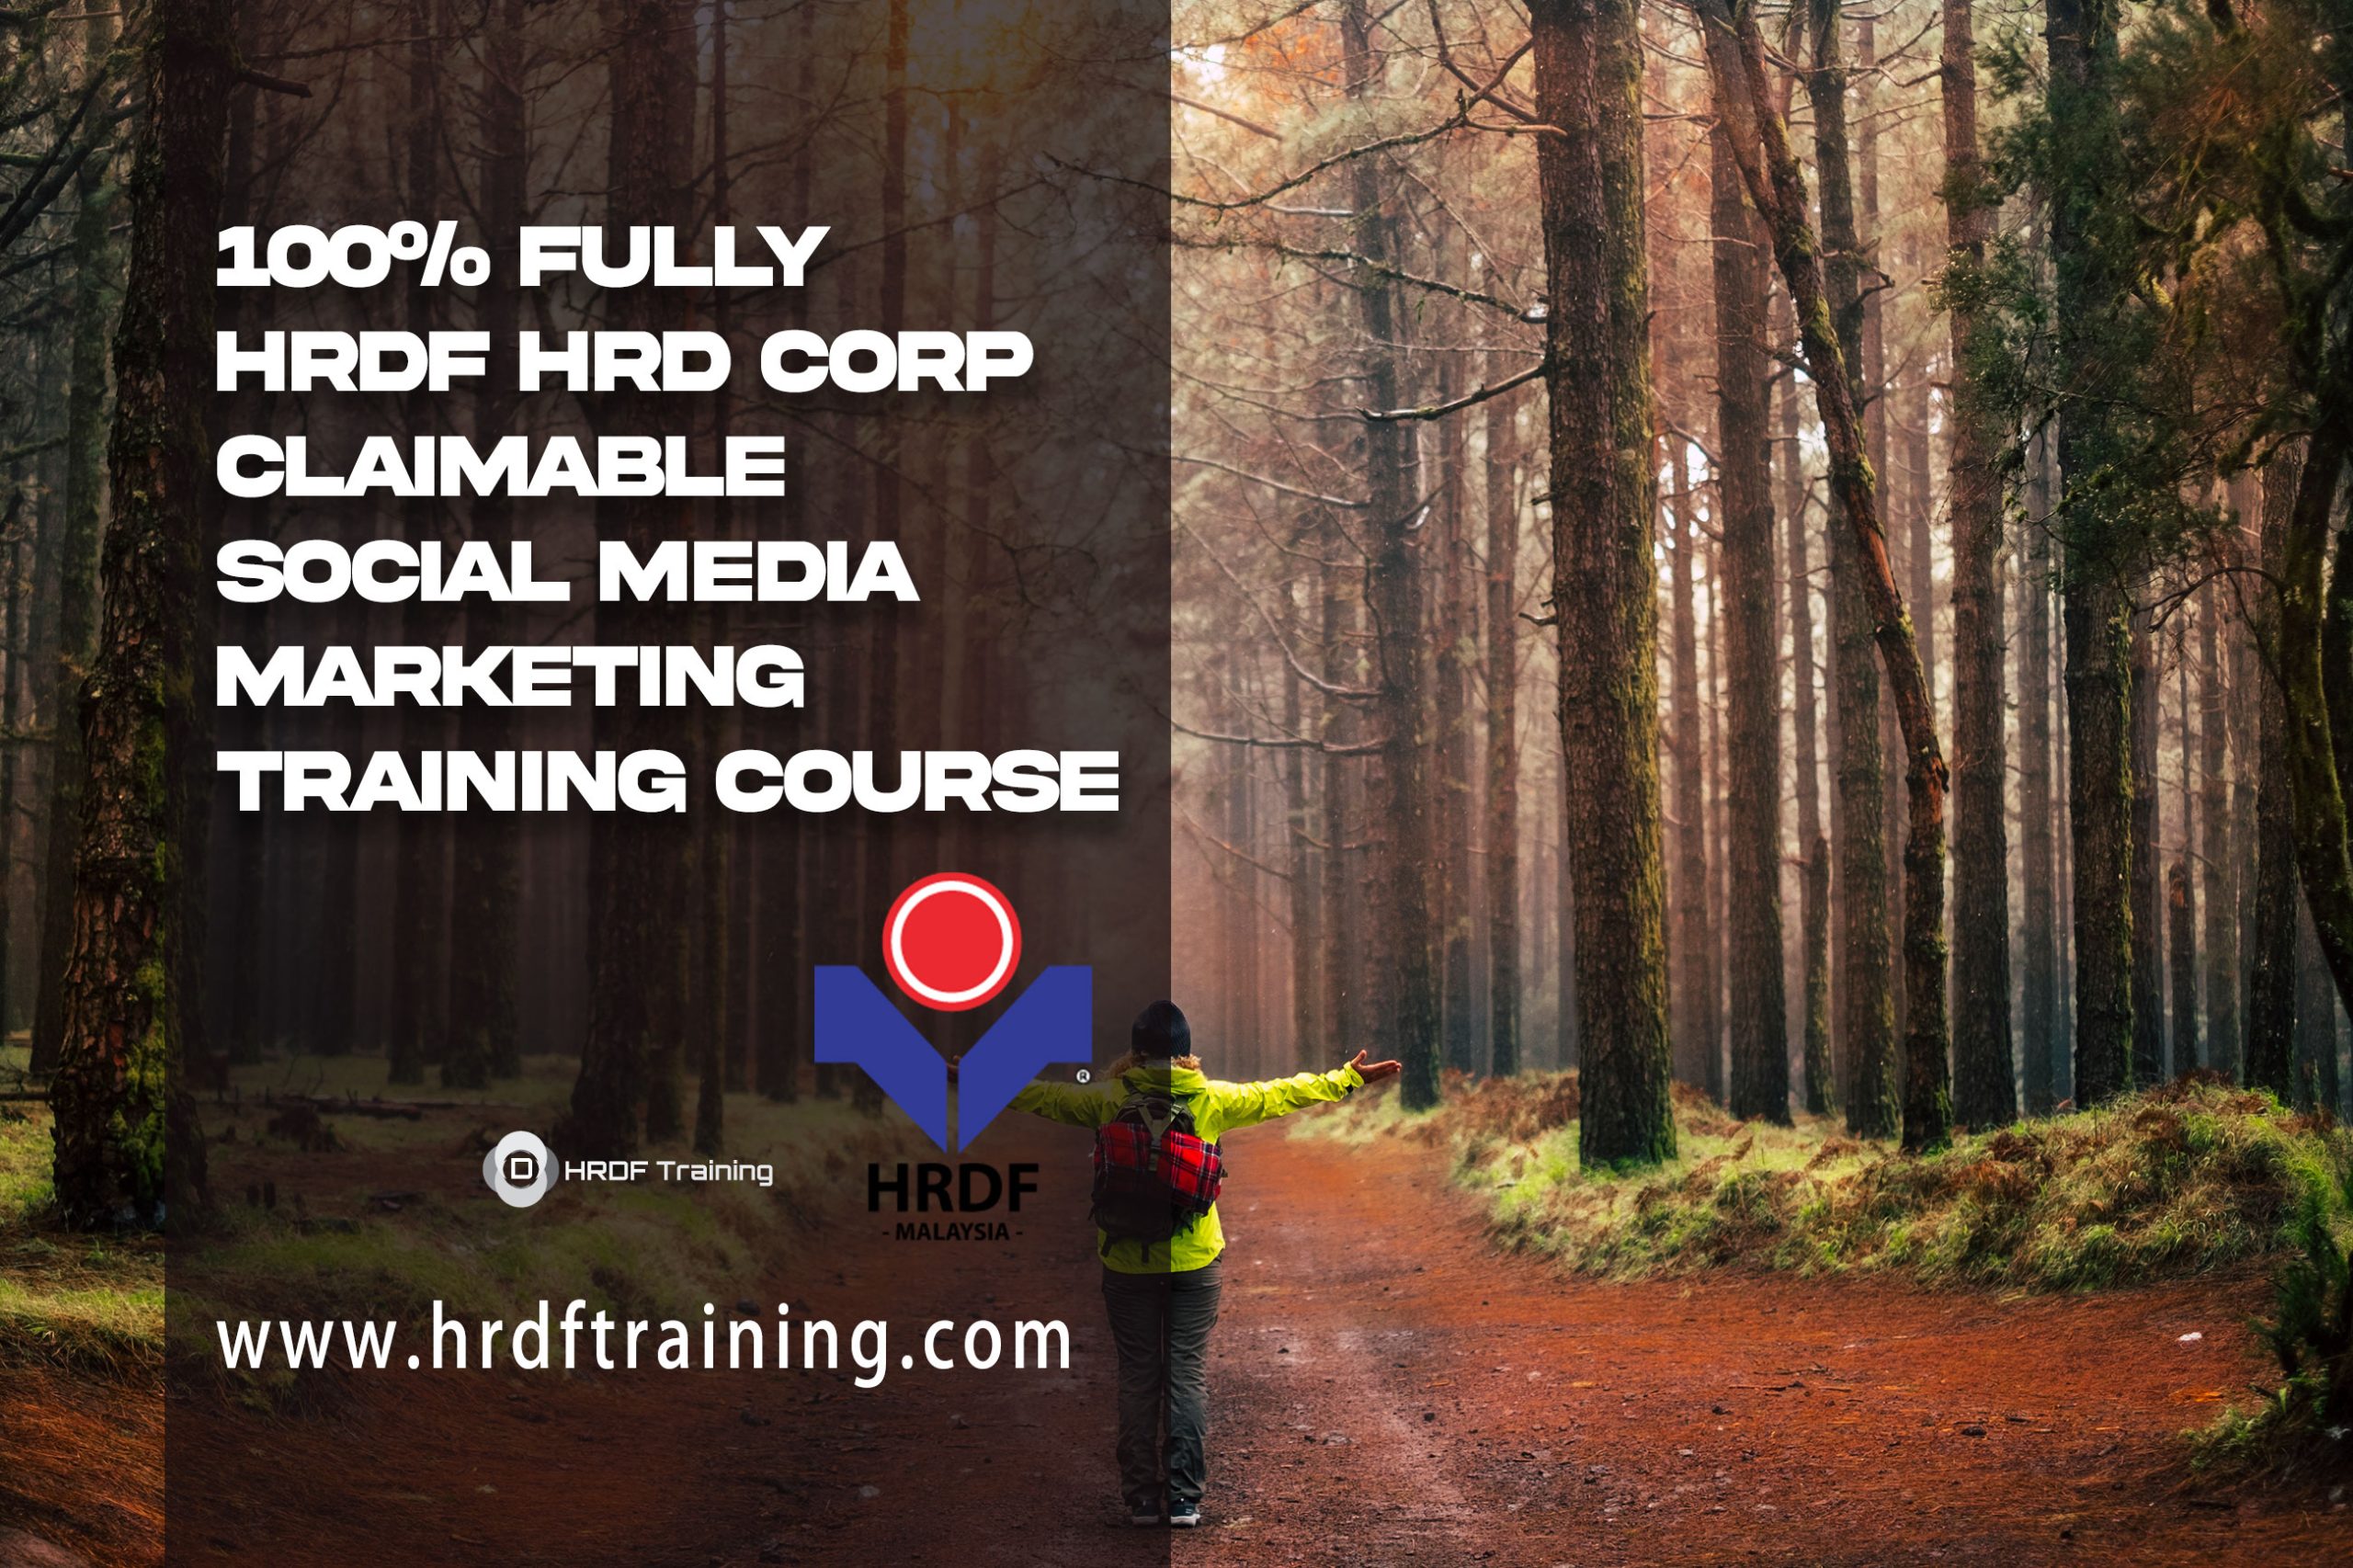 HRDF HRD Corp Claimable Social Media Marketing Training Course - November 2022